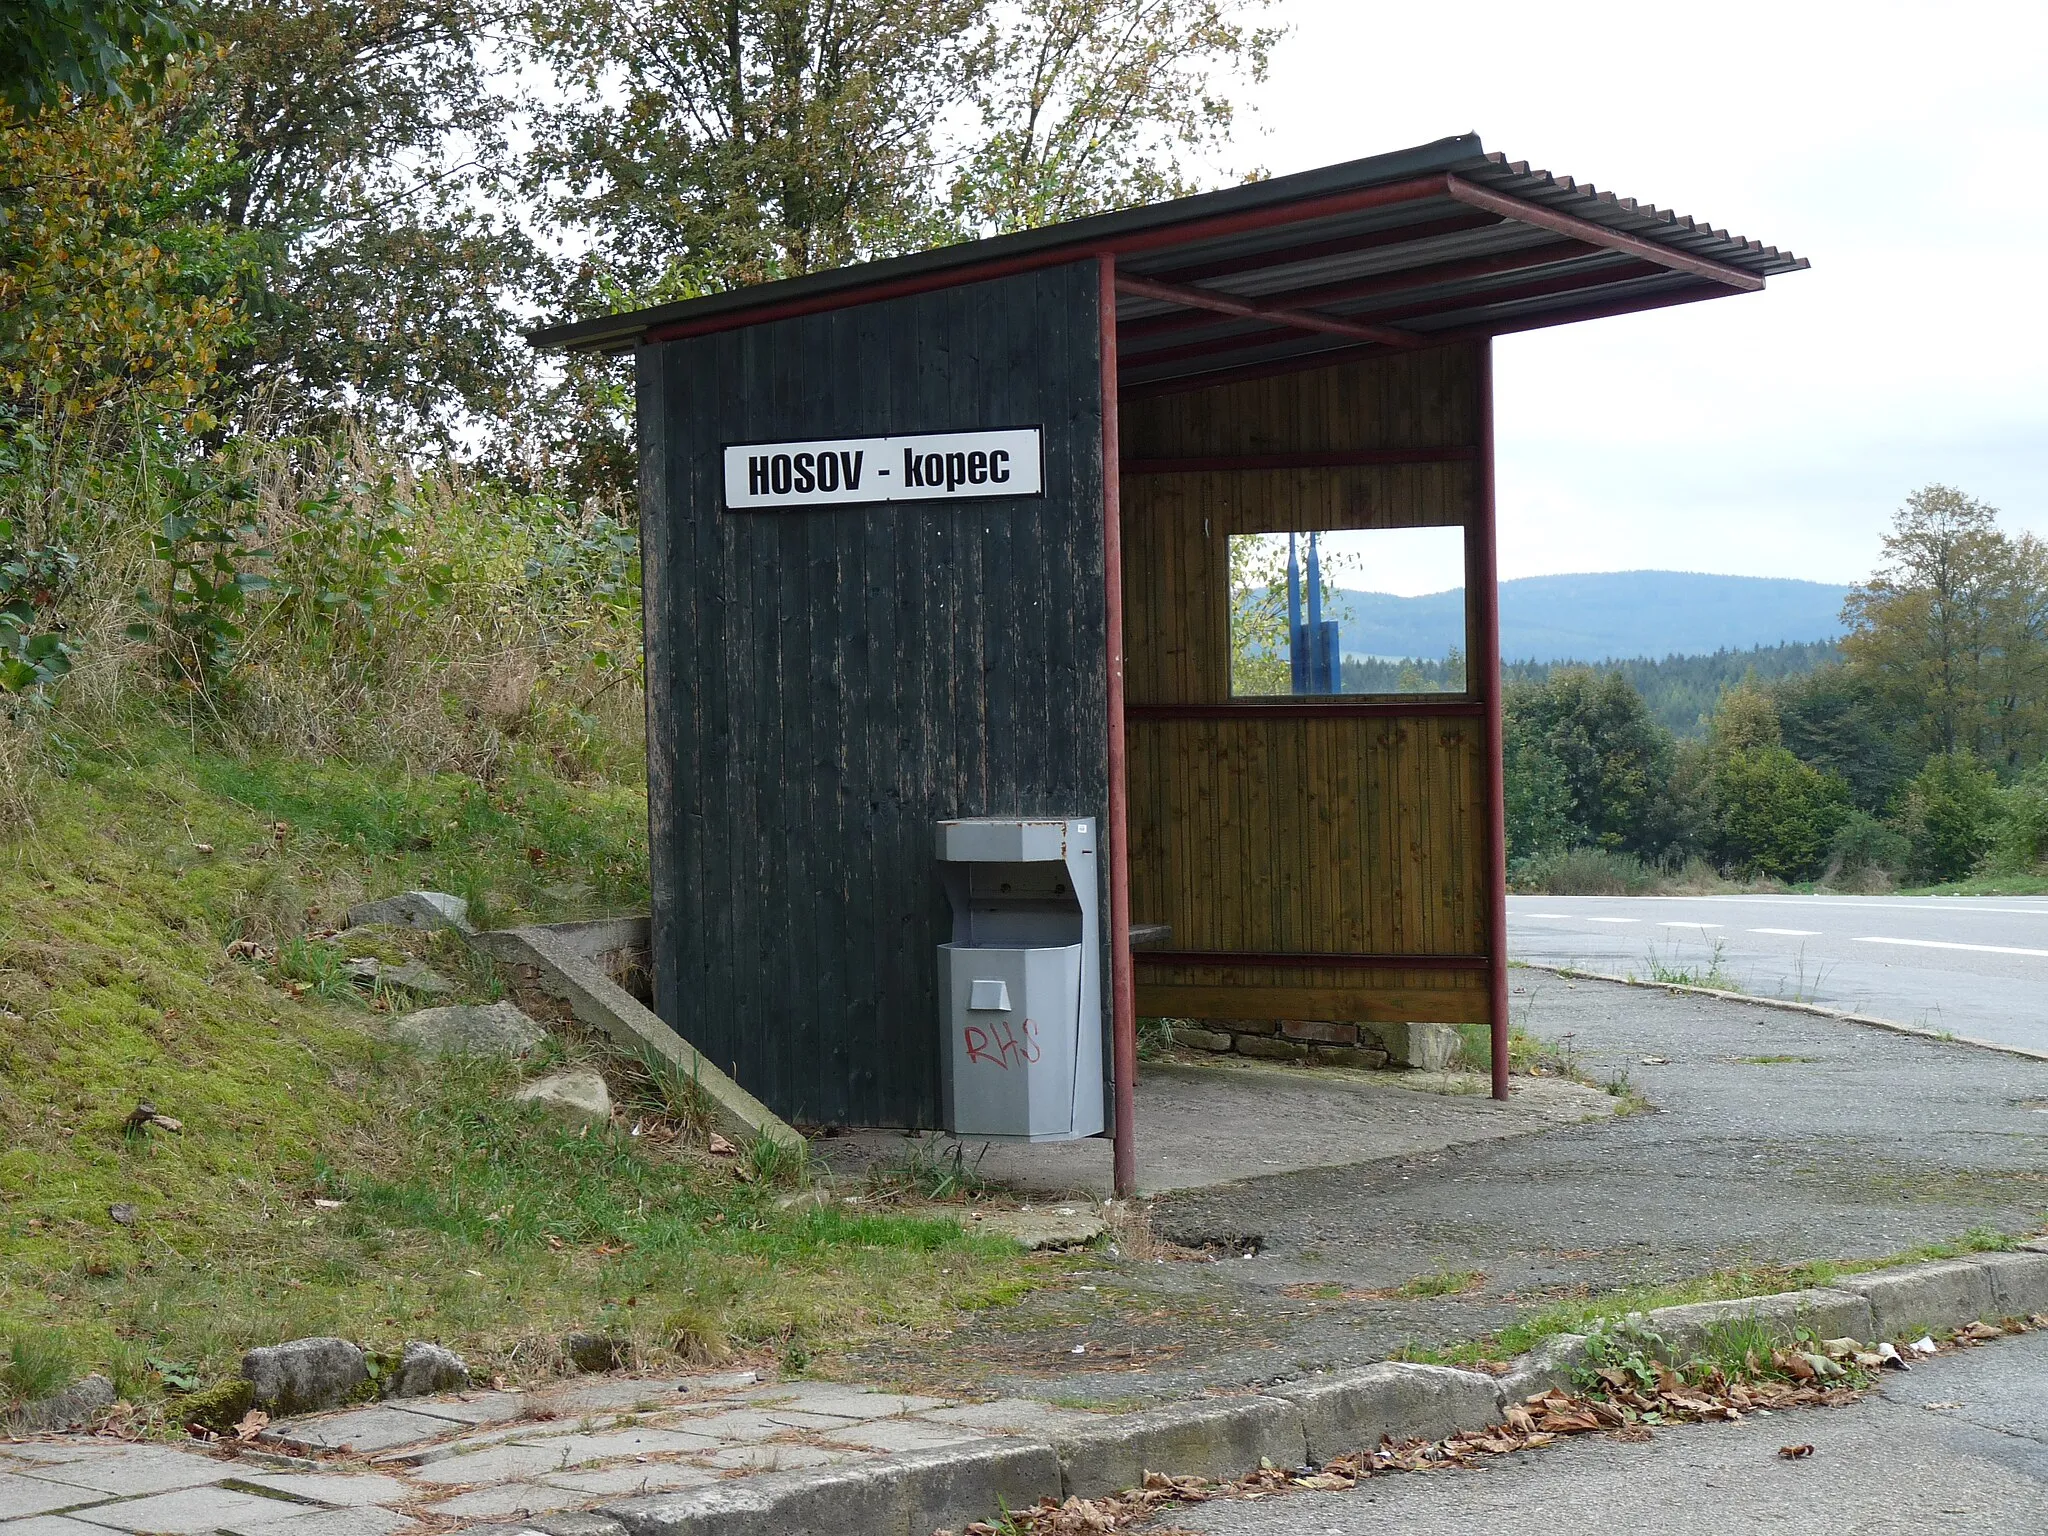 Photo showing: Bus shelter in the village of Hosov (part of the town of Jihlava) in Jihlava District, Vysočina Region, Czech Republic.